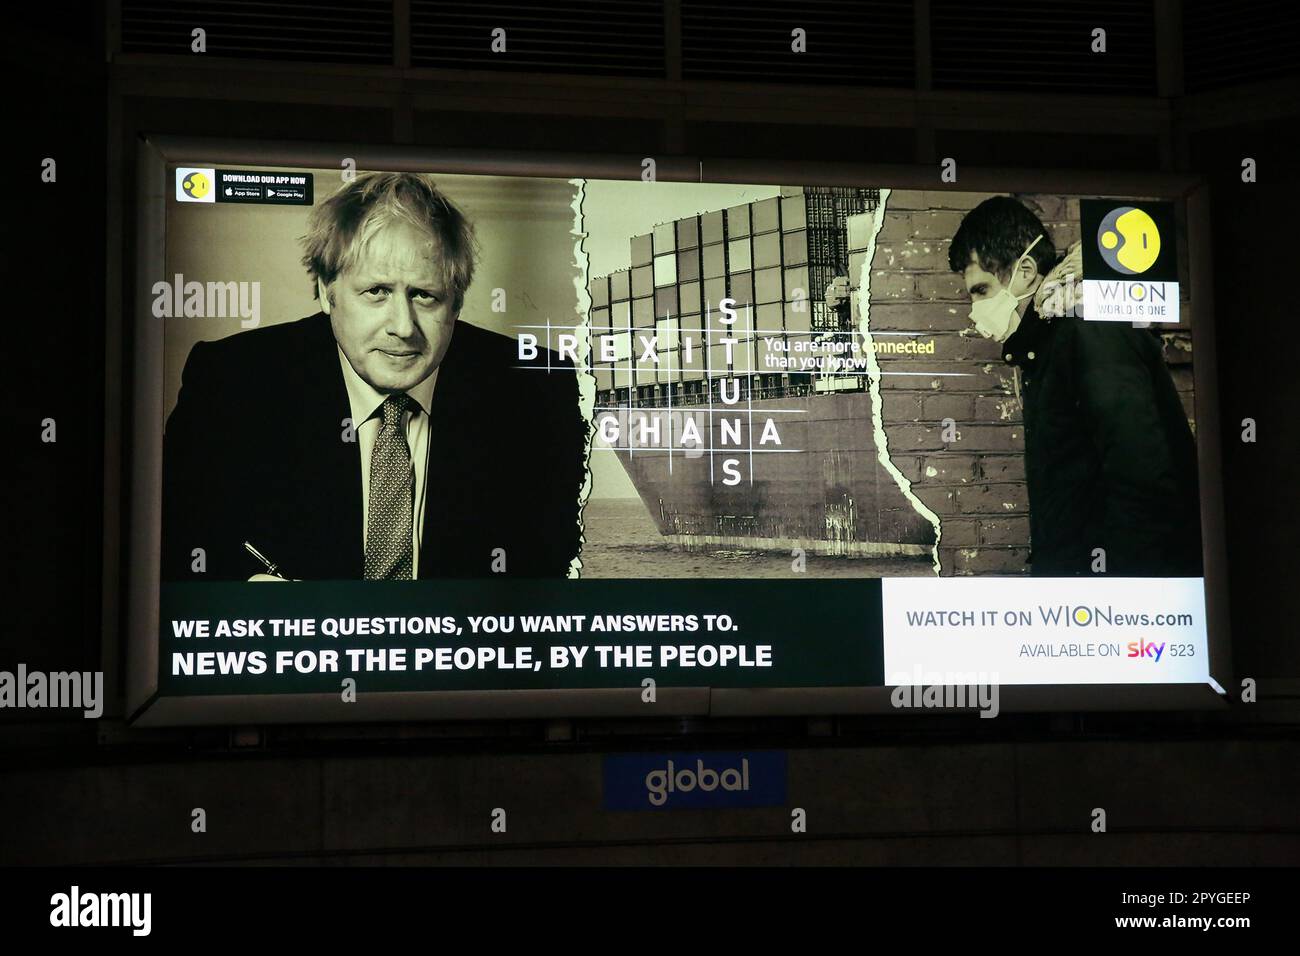 Former Prime Minister Boris Johnson appears on an advert displayed at a London underground station for WION news. WION is an Indian multinational English language news channel. Stock Photo